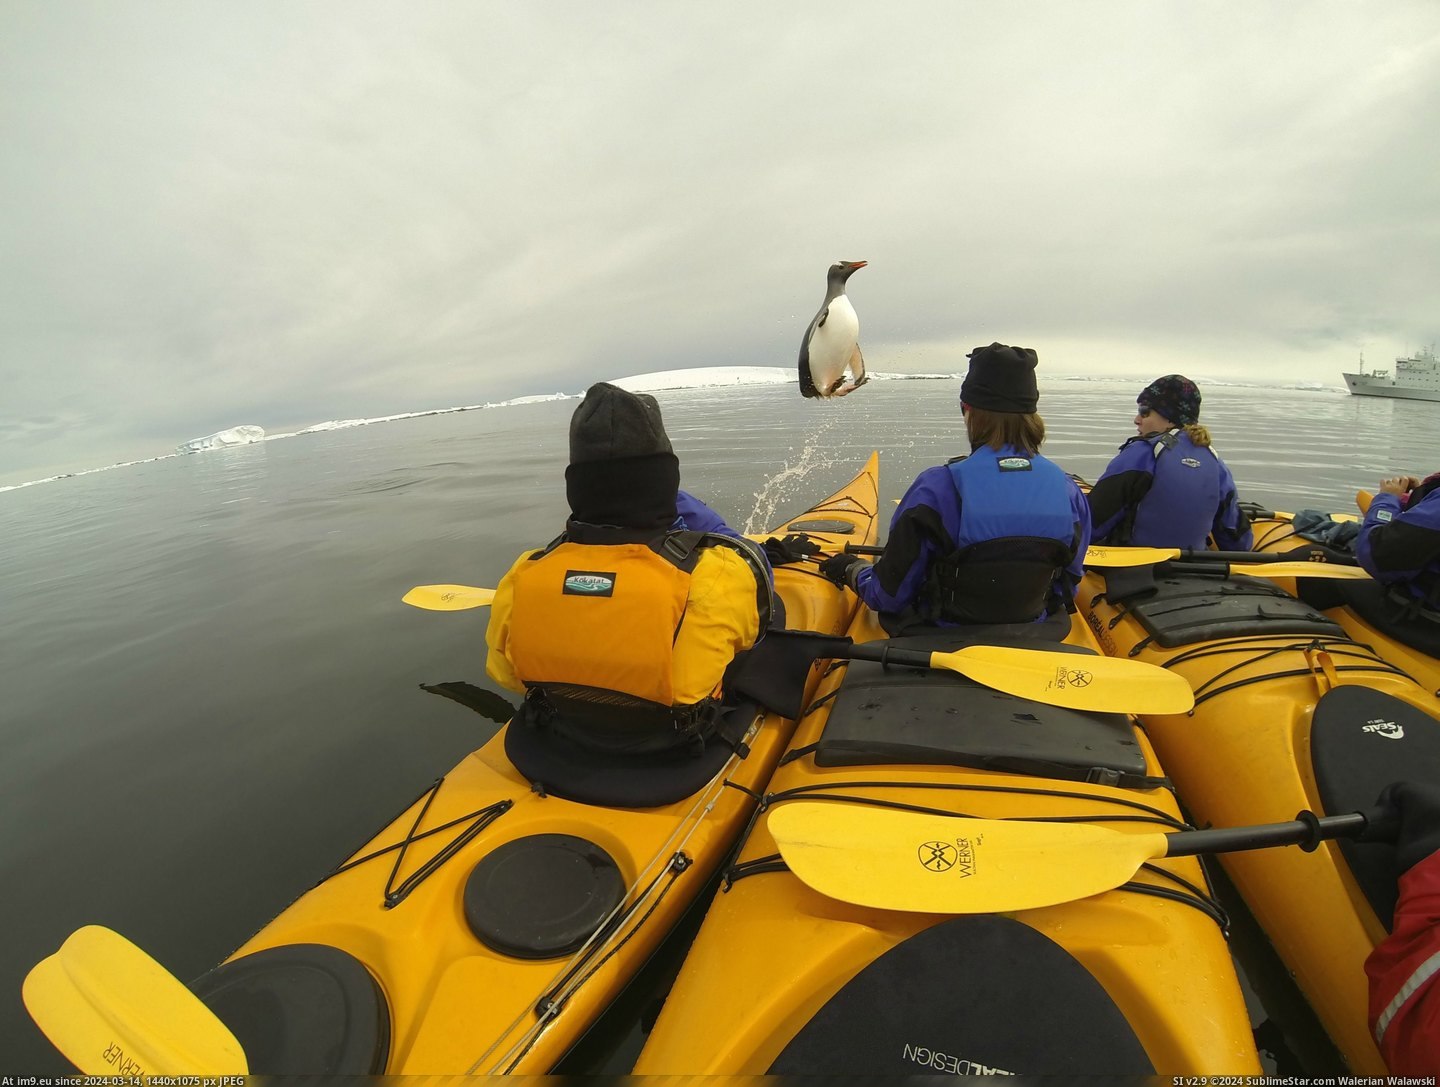 #One #Caught #Group #Antarctica #Kayakers #Trip #Jumping #Penguin [Pics] One of the Kayakers on my recent trip to Antarctica caught a penguin jumping into their group. Pic. (Bild von album My r/PICS favs))